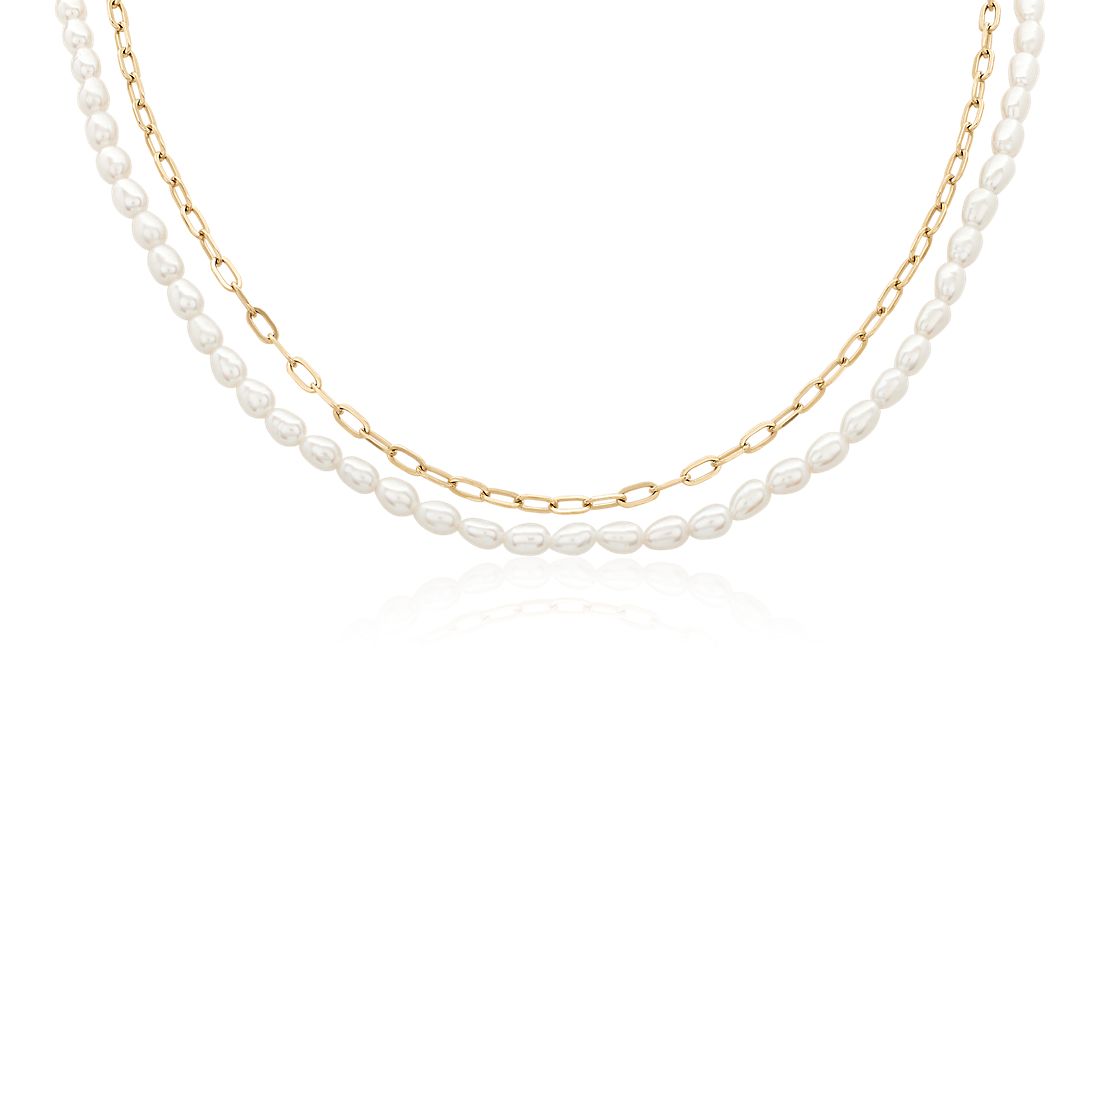 Freshwater Pearl and Paperclip Chain Double Strand Necklace in 14k Yellow Gold